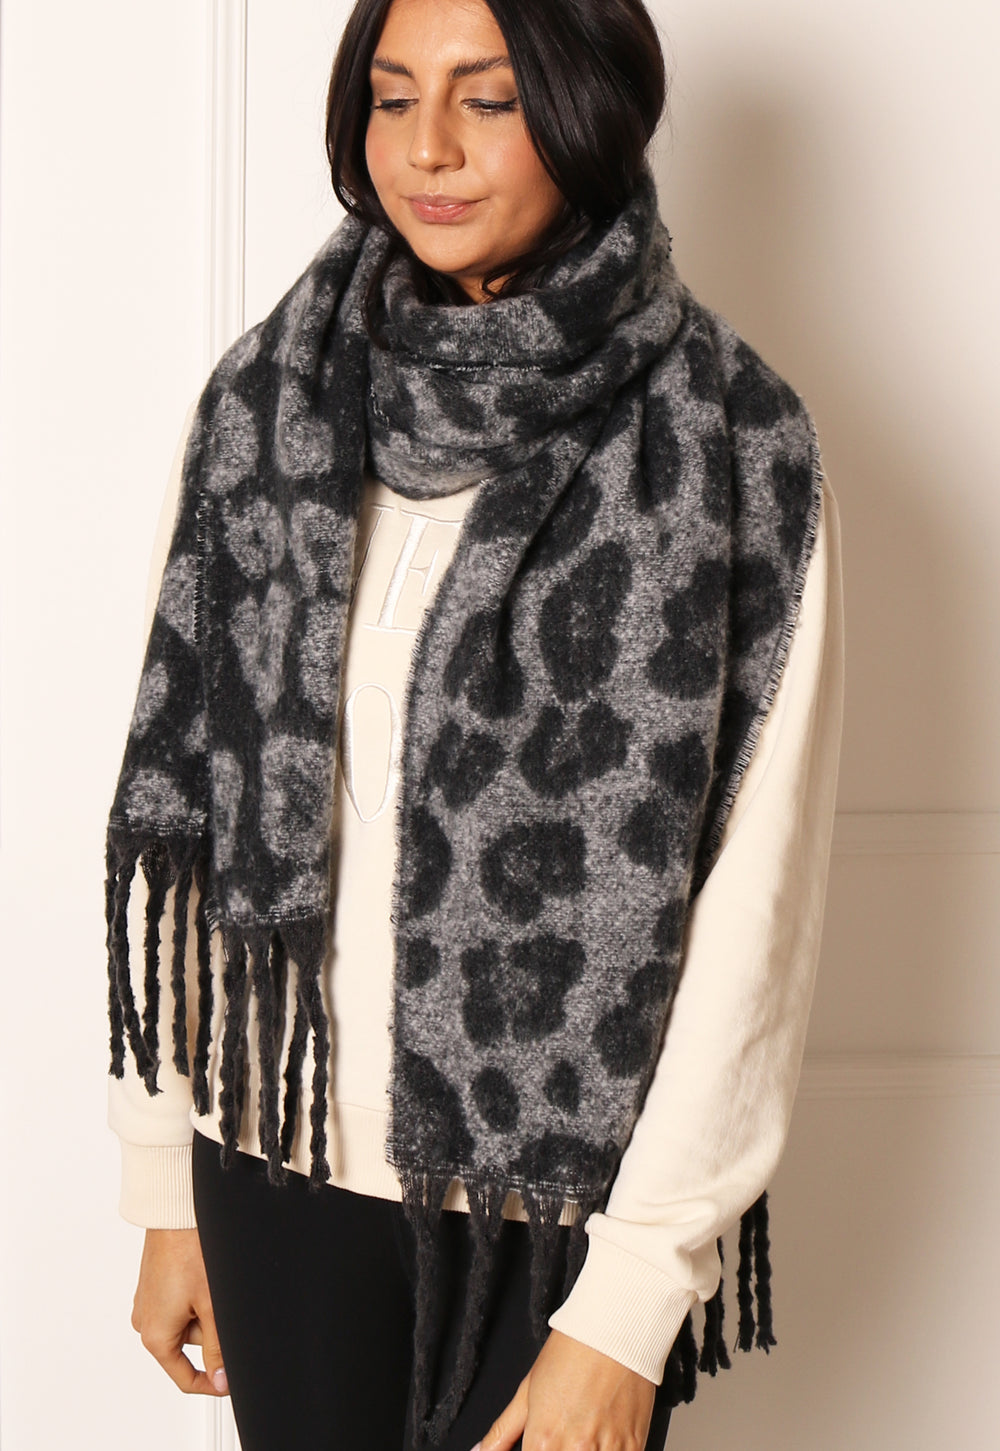 ONLY Leopard Print Oversized Brushed Scarf with Tassels in Black & Grey - One Nation Clothing